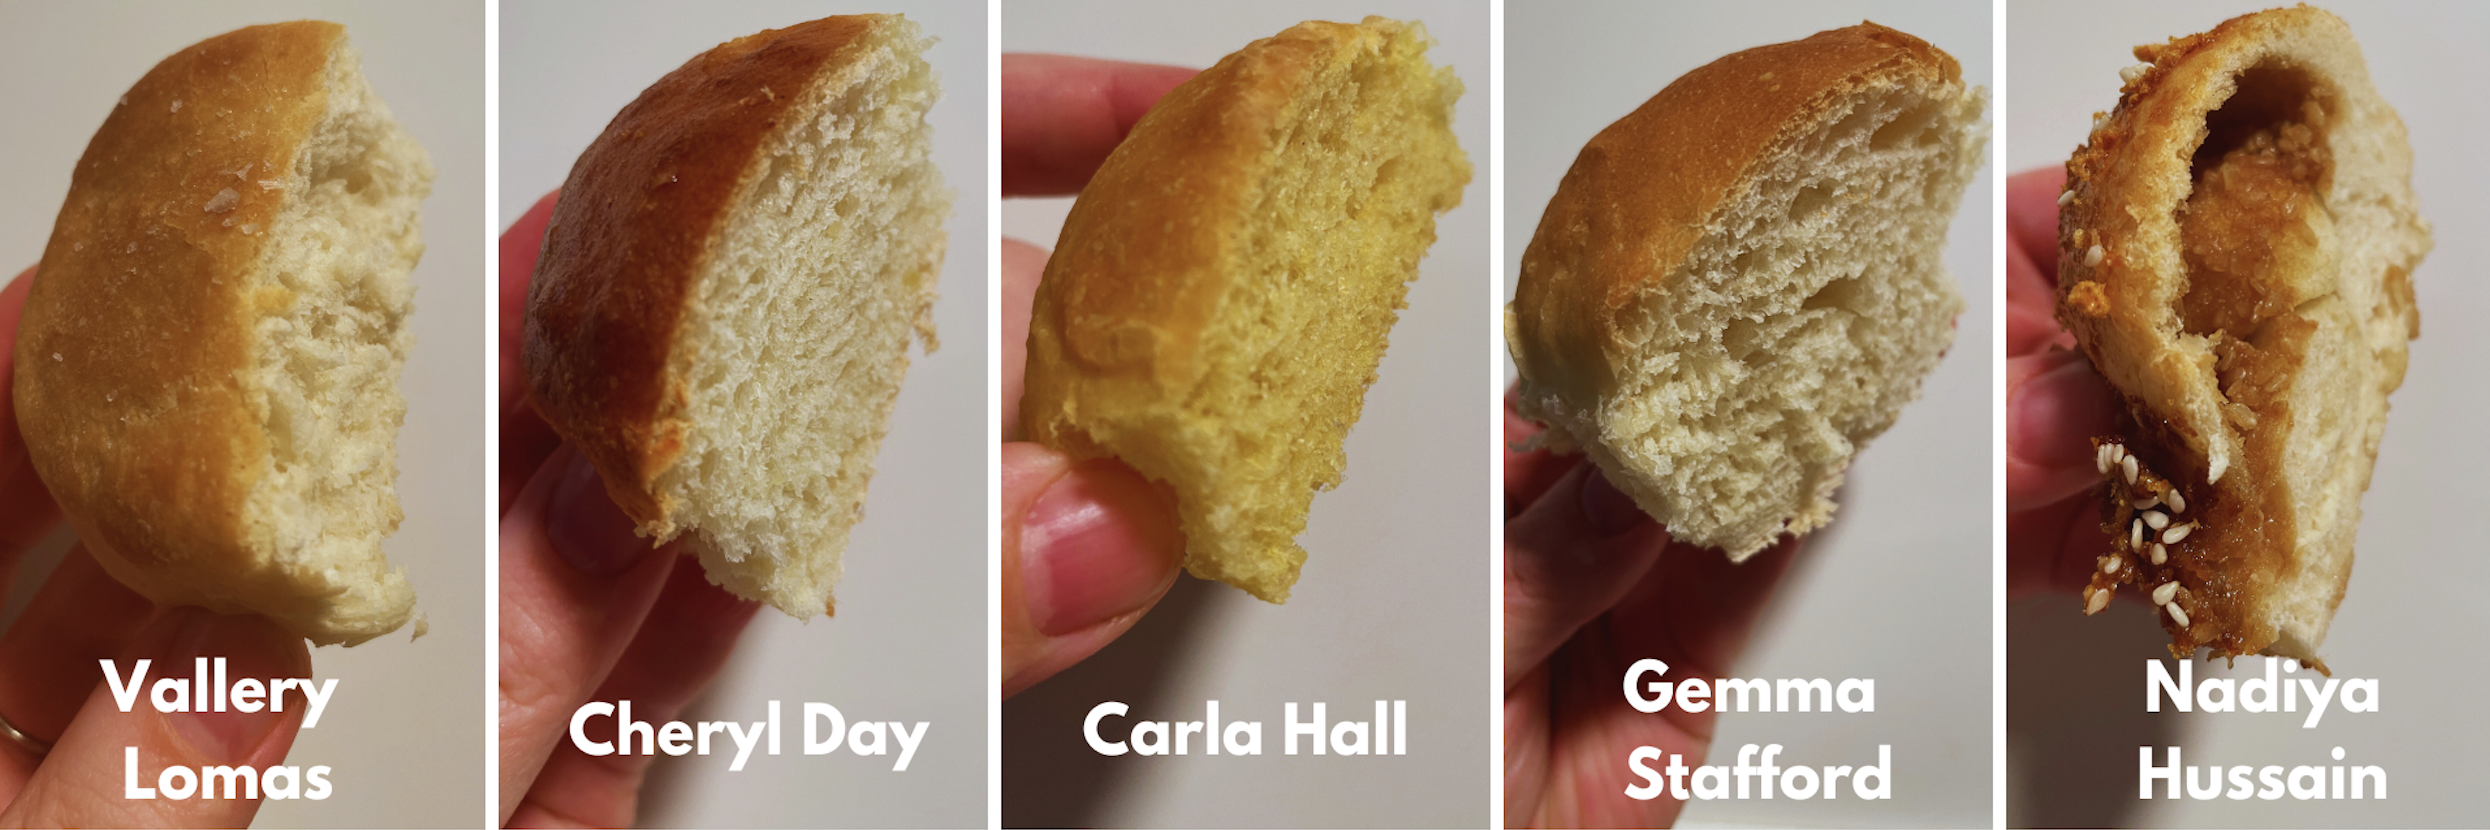 Five close-ups of rolls sliced in half to show interior, with names of each cookbook author, in order of Vallery Lomas (light and dense), Cheryl Day (golden crust and fluffy interior), Carla Day (lightly orange and somewhat flat), Gemma Stafford (light golden top and fluffy interior), and Nadiya Hussain (messy on the inside and out with a big gap where filling should have been)